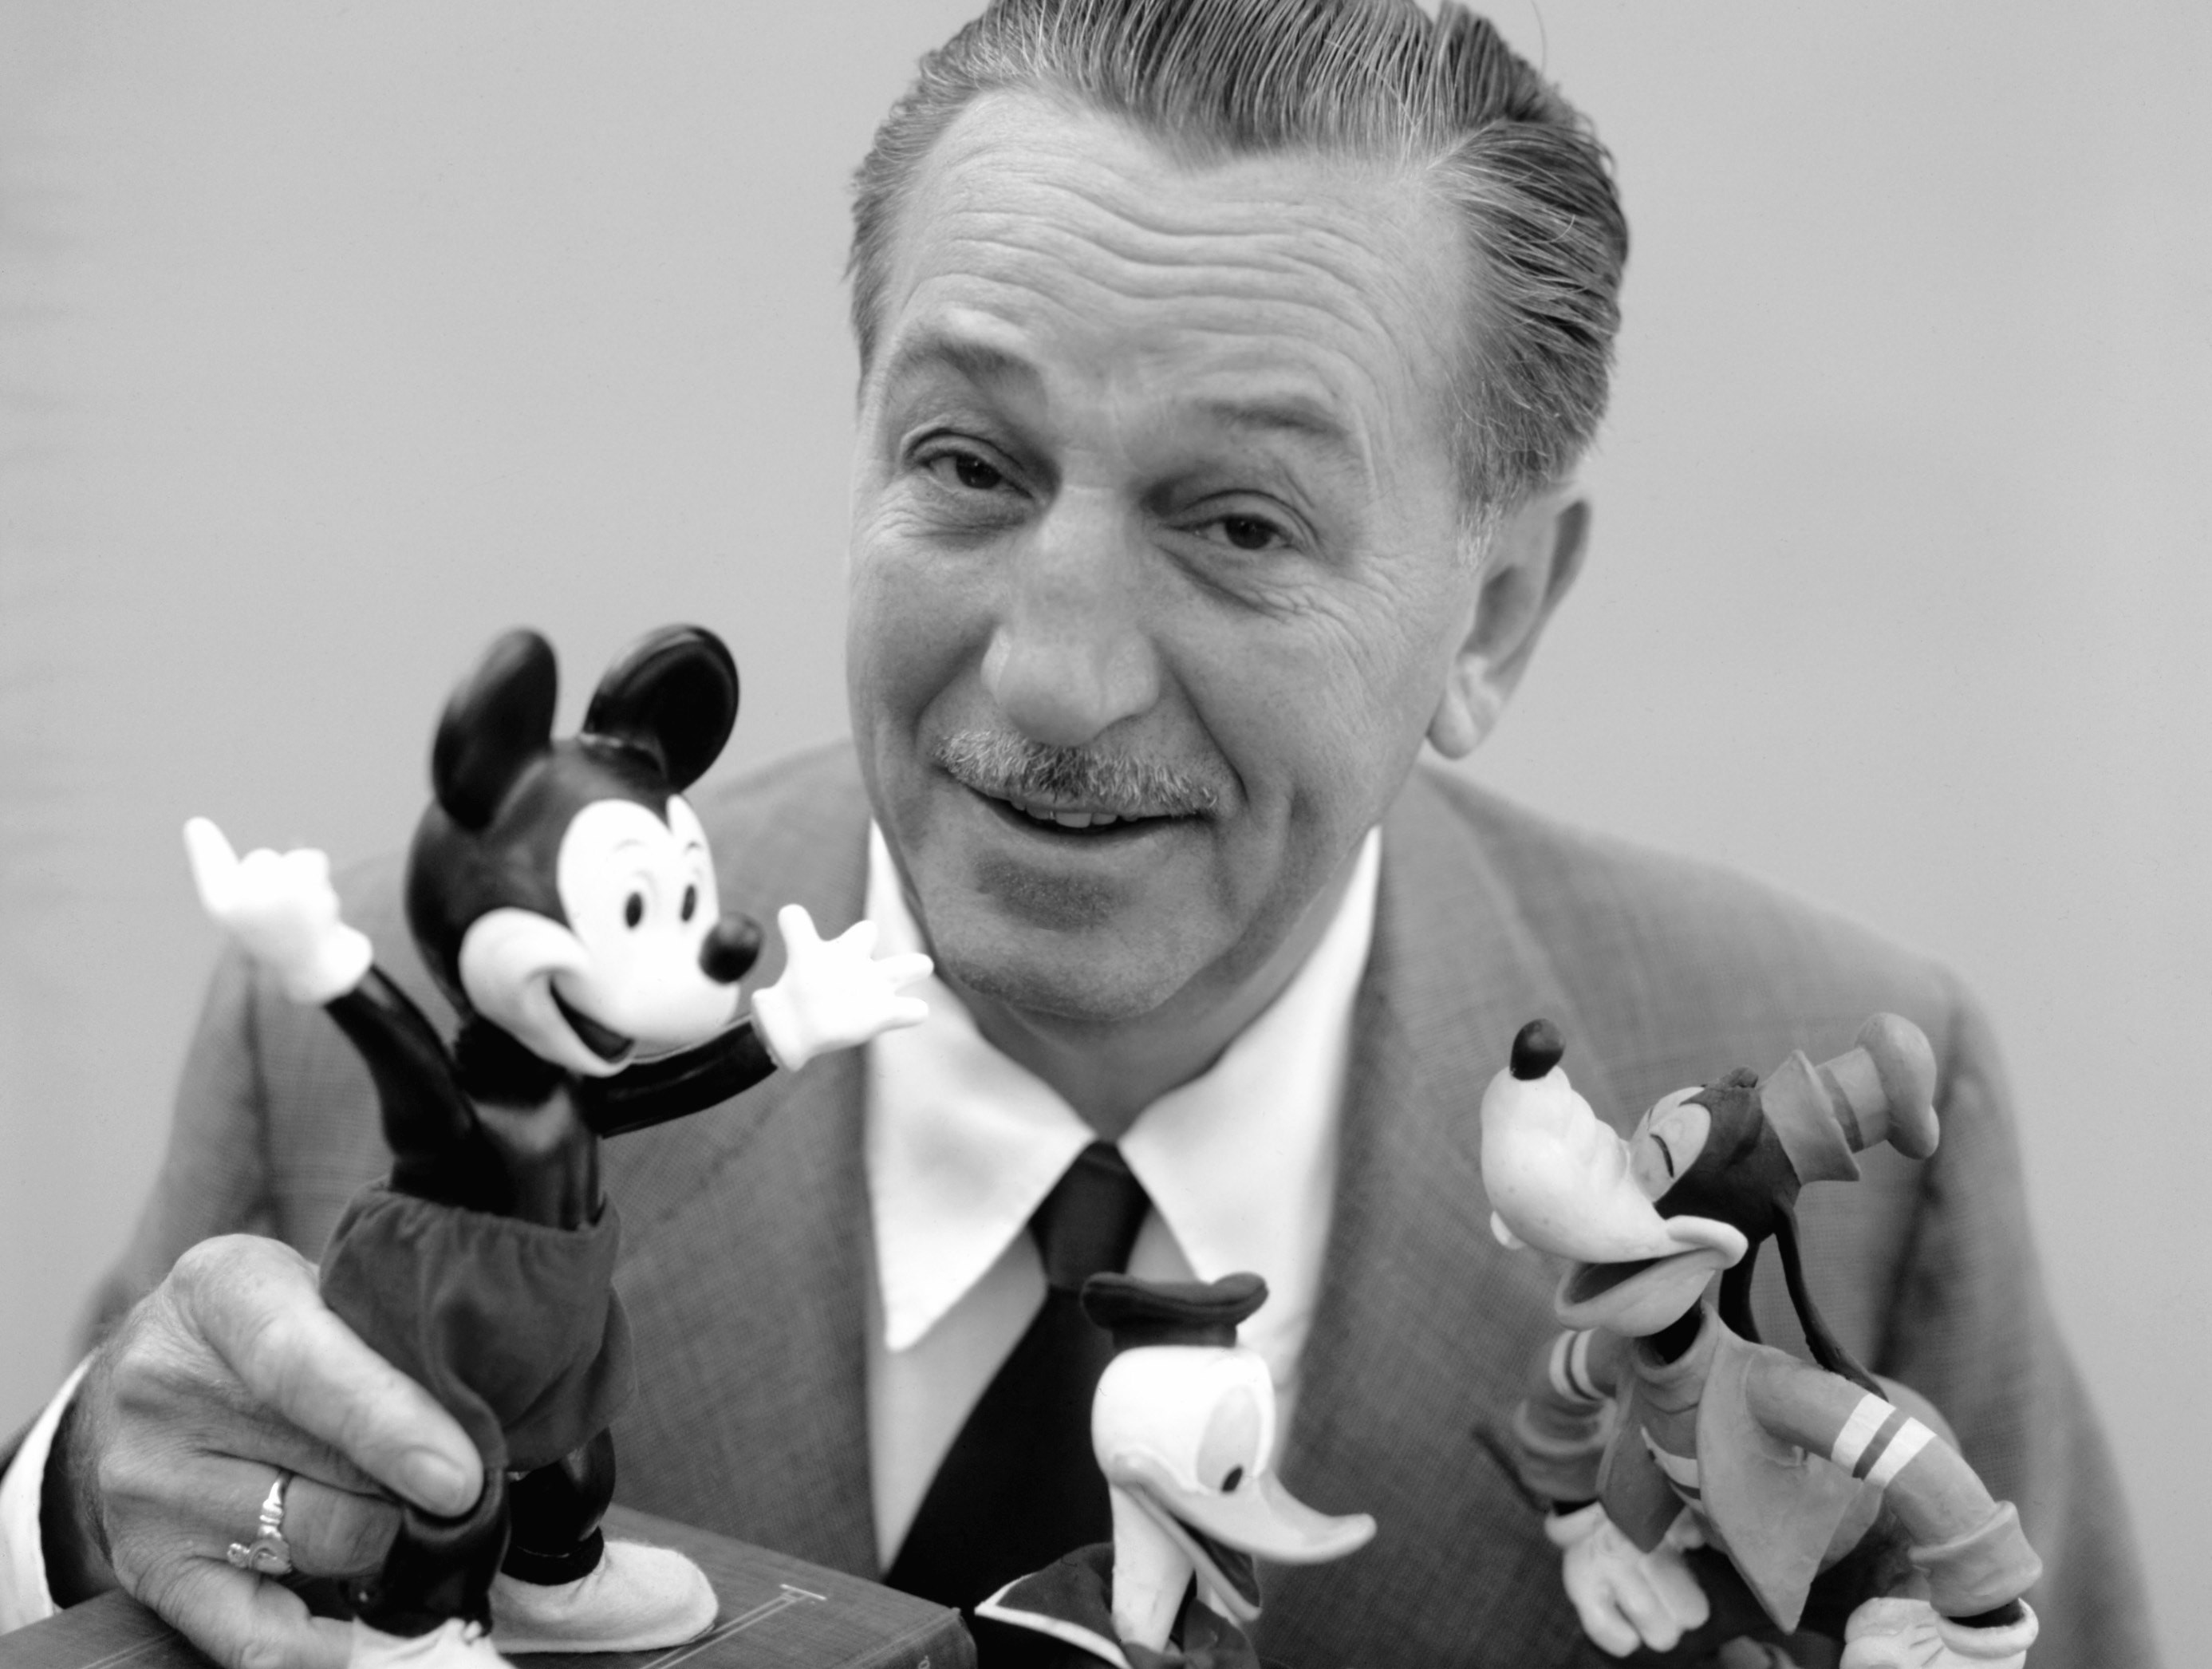 Walt Disney once said, “The way to get started is to quit talking and begin doing.” (source: Entertainment Weekly)